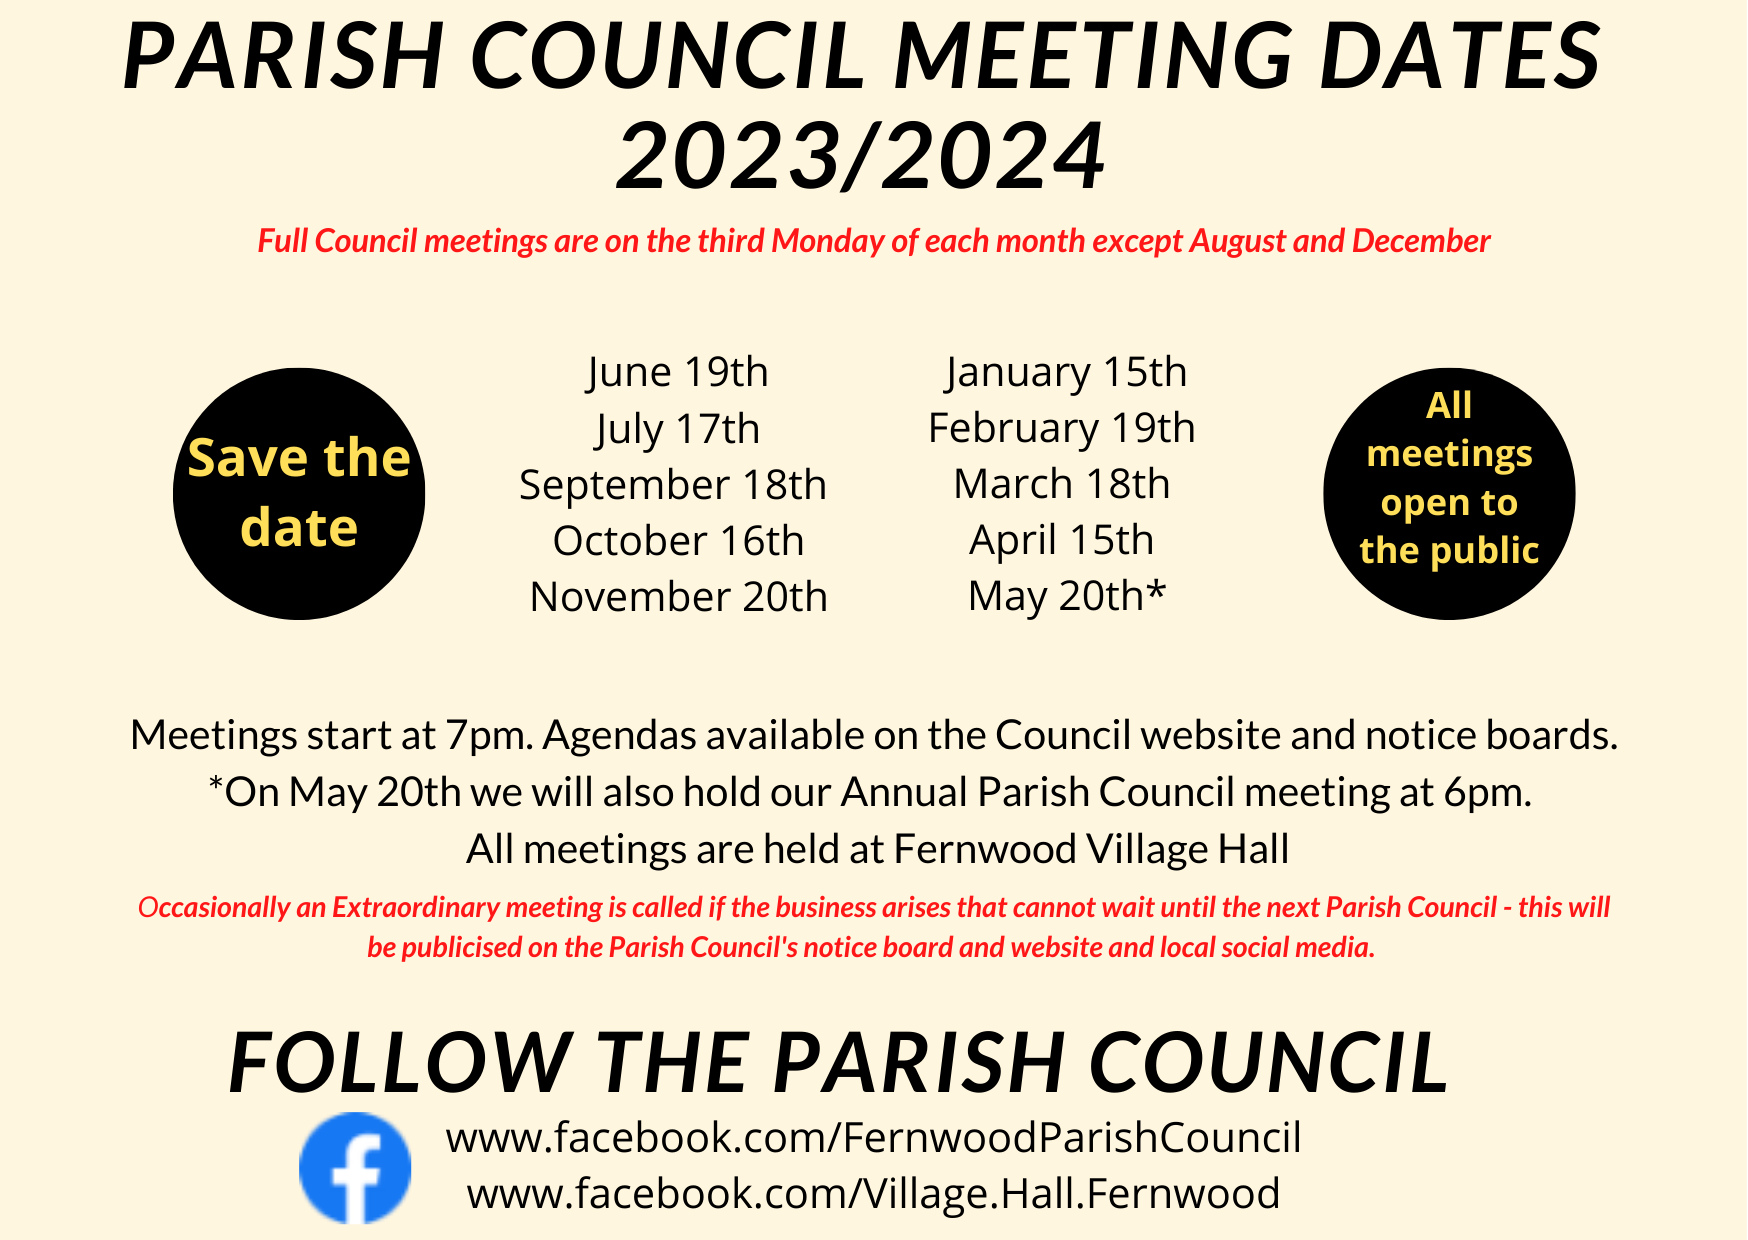 All meetings open to the public.